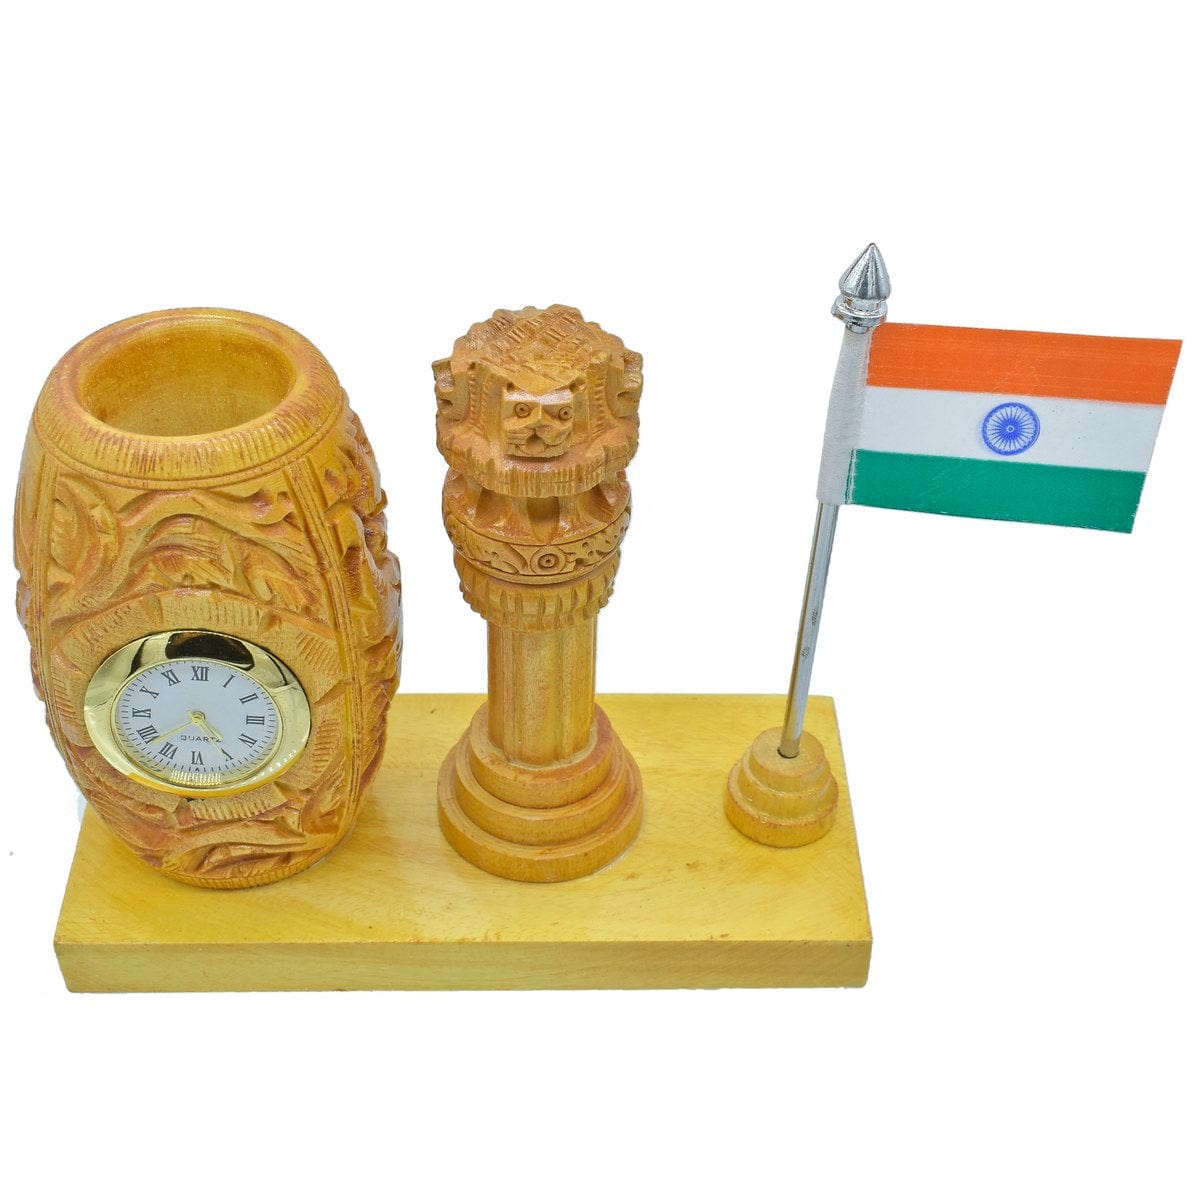 jags-mumbai Pen Stands Wooden Table Top Pen Stand With Ashokchakra